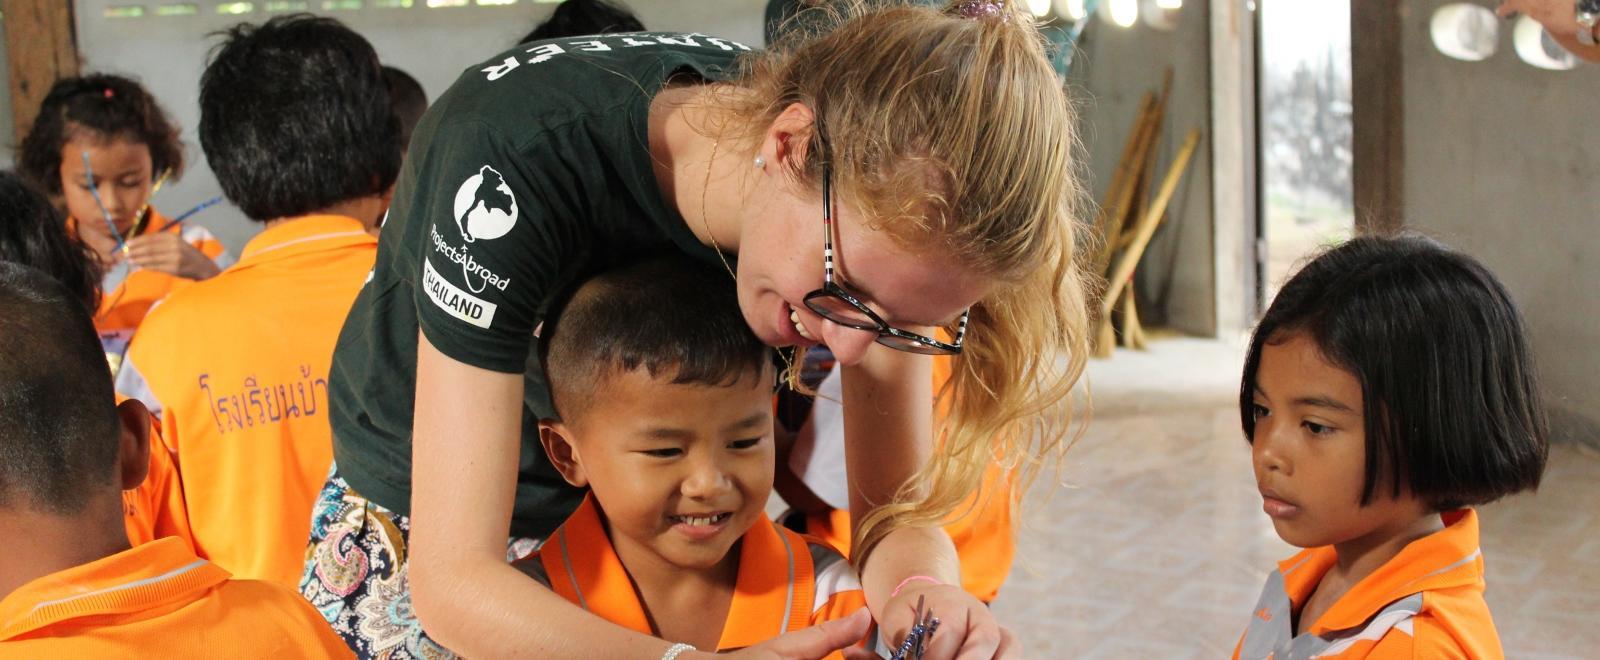 A Projects Abroad volunteer who works with children enjoys her volunteer placements abroad.